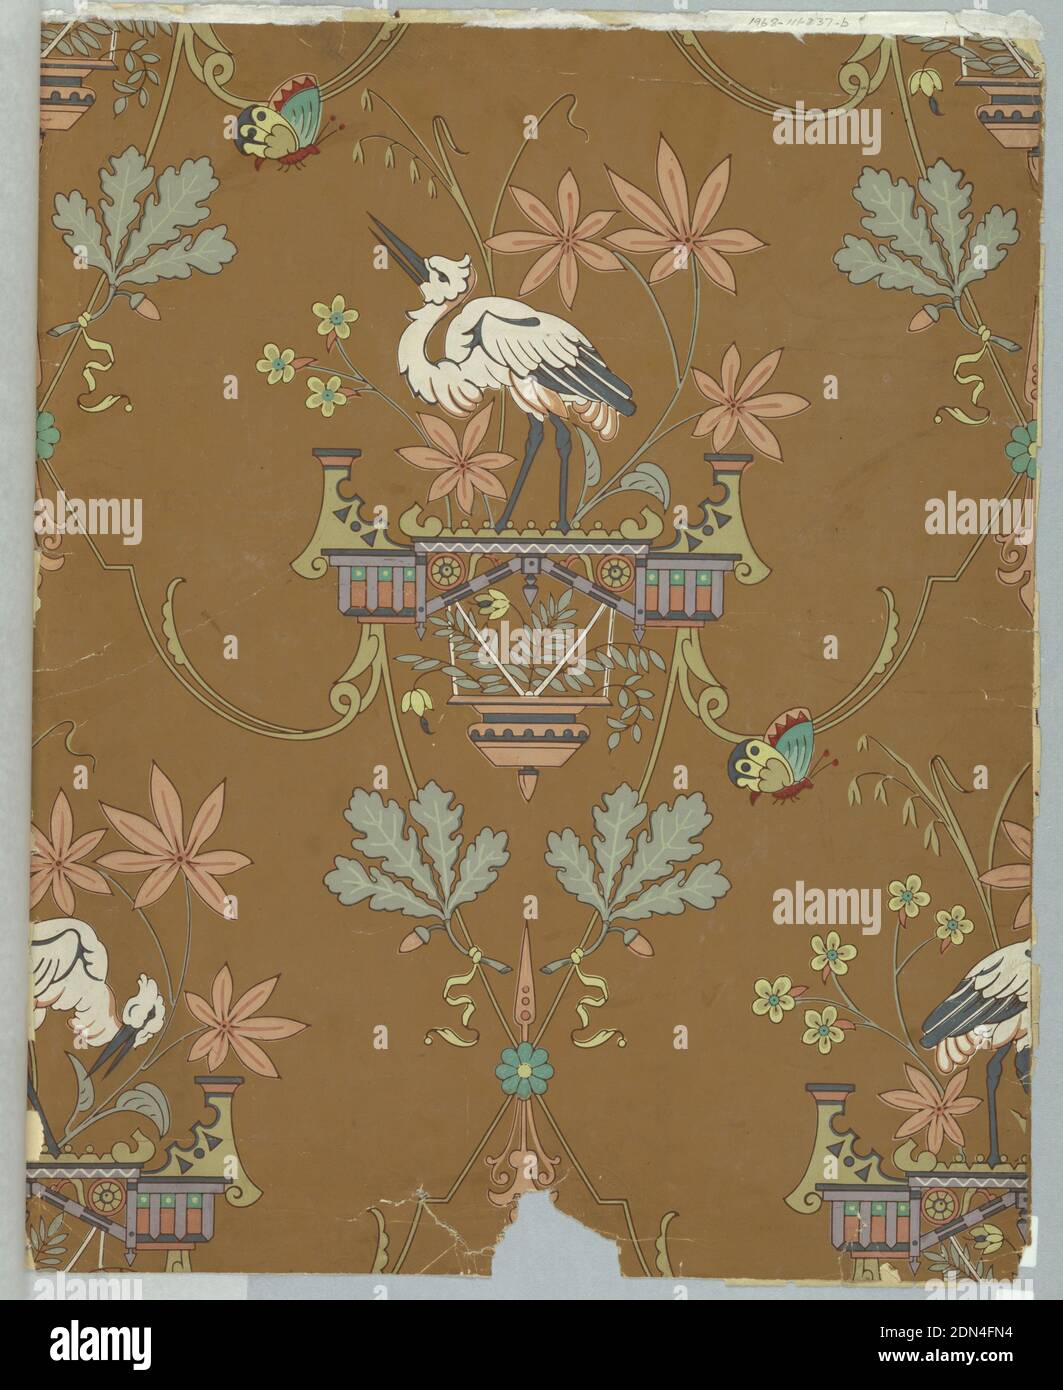 Sidewall, Block-printed paper, Chinoiserie design. a) features a white crane on a platform. Leaf clusters having the appearance of maple and oak and butterflies. Printed on a brown ground; b) contains 2 ornate bamboo frames, each with an Asian woman. In the alternating corners are white lilies and foliage. Printed on a deep burgundy ground., England, 1870–85, Wallcoverings, Sidewall Stock Photo